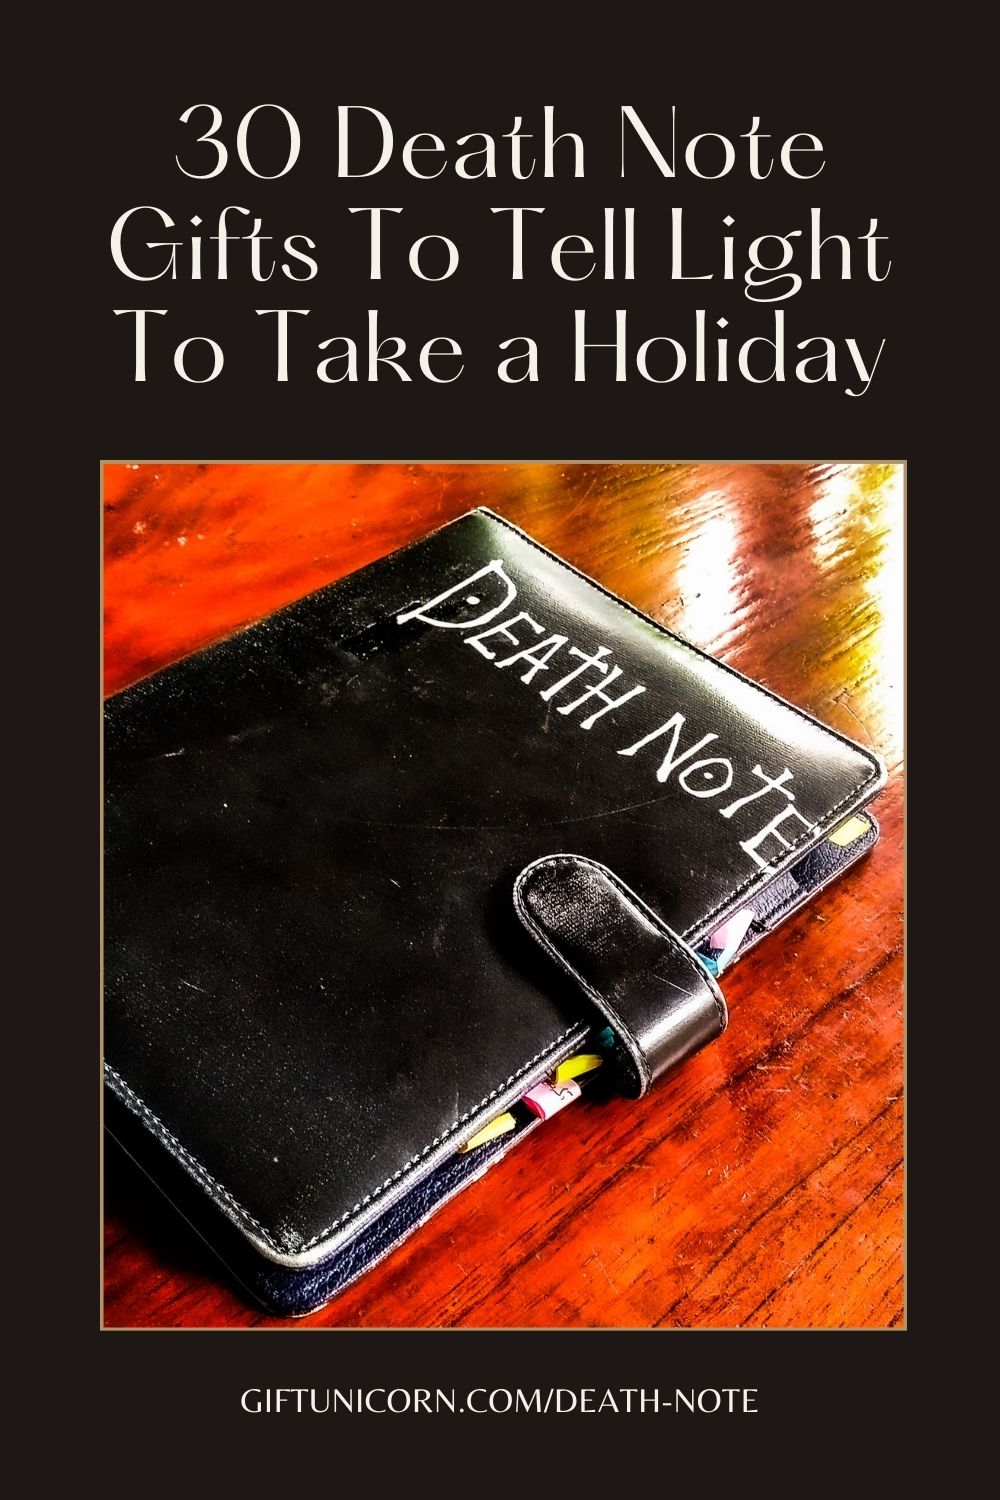 30 Death Note Gifts To Tell Light To Take a Holiday - pinterest pin image